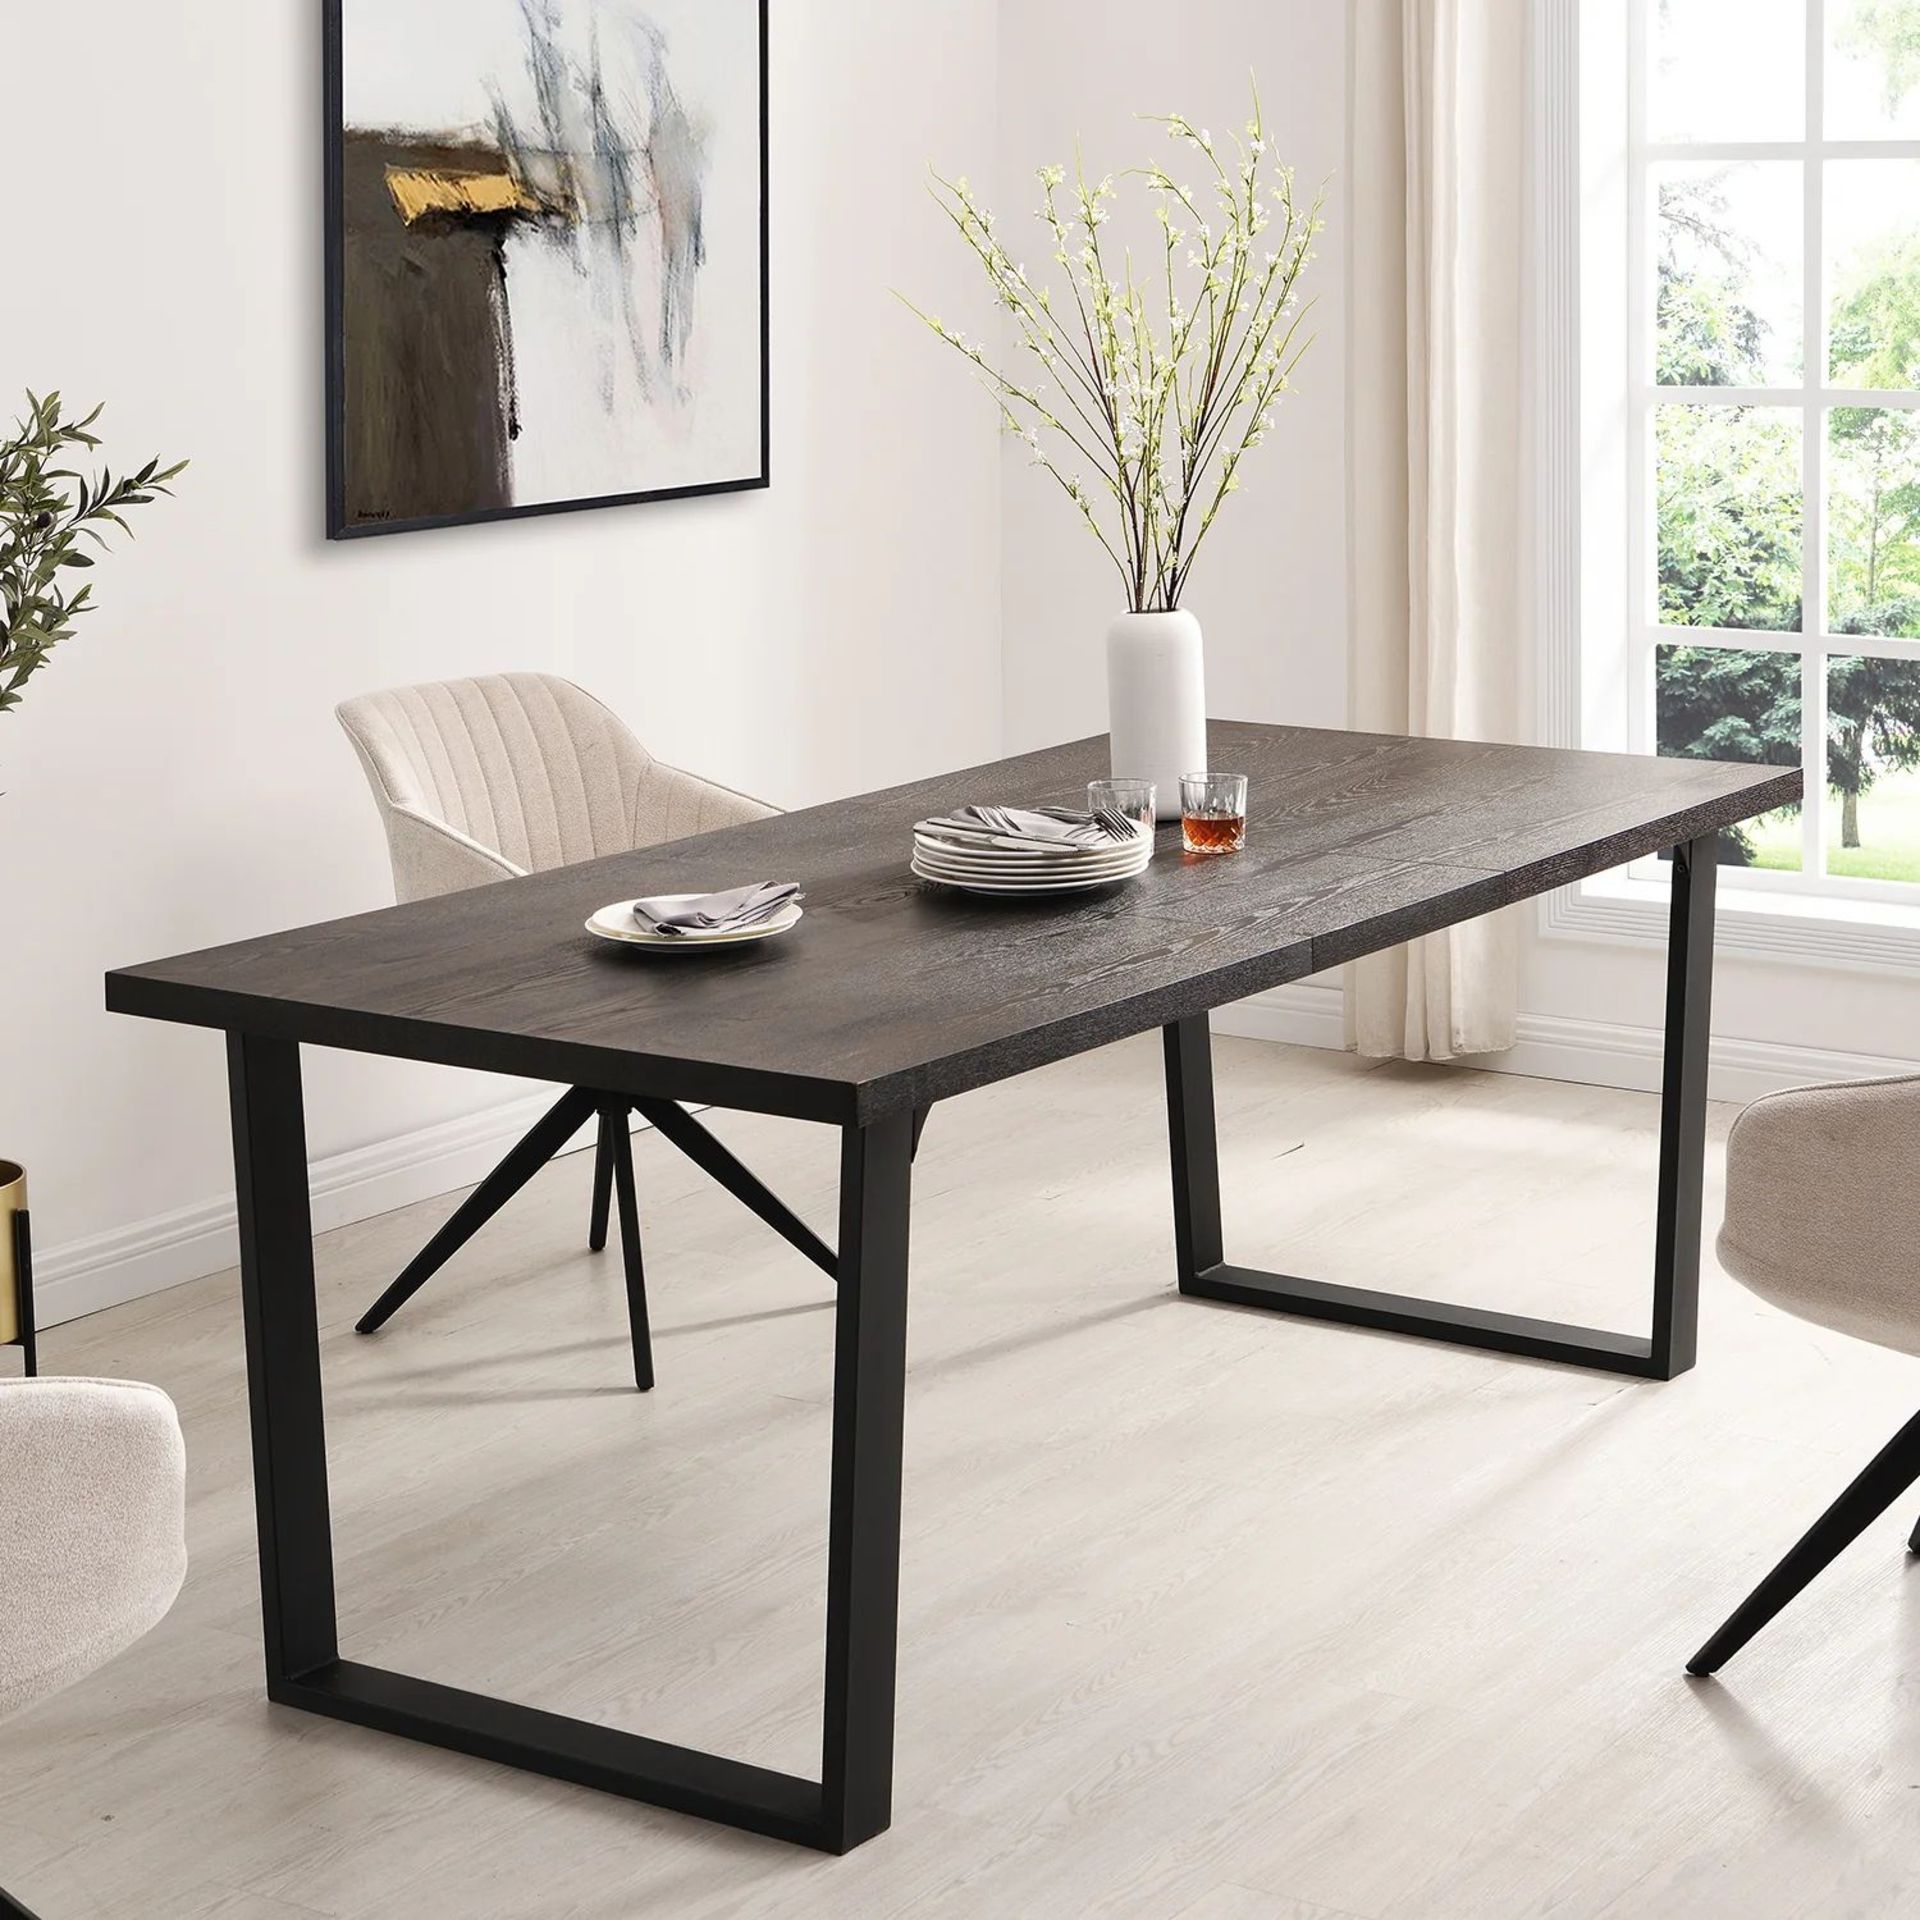 BERN 6-8 Seater Dark Oak Extending Dining Table with Metal Legs. - R19.5. RRP £439.99. The table top